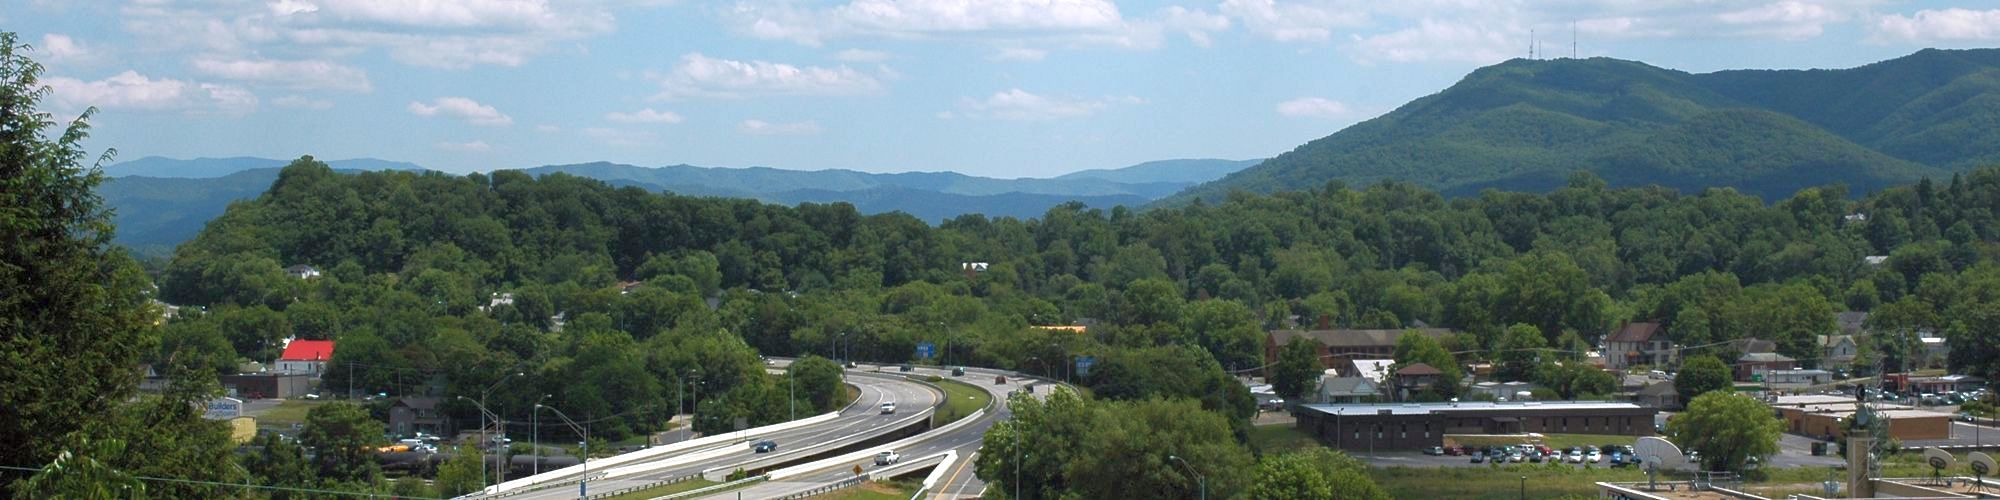 Interstate 26 wraps through downtown Johnson City with Buffalo Mountain in the background